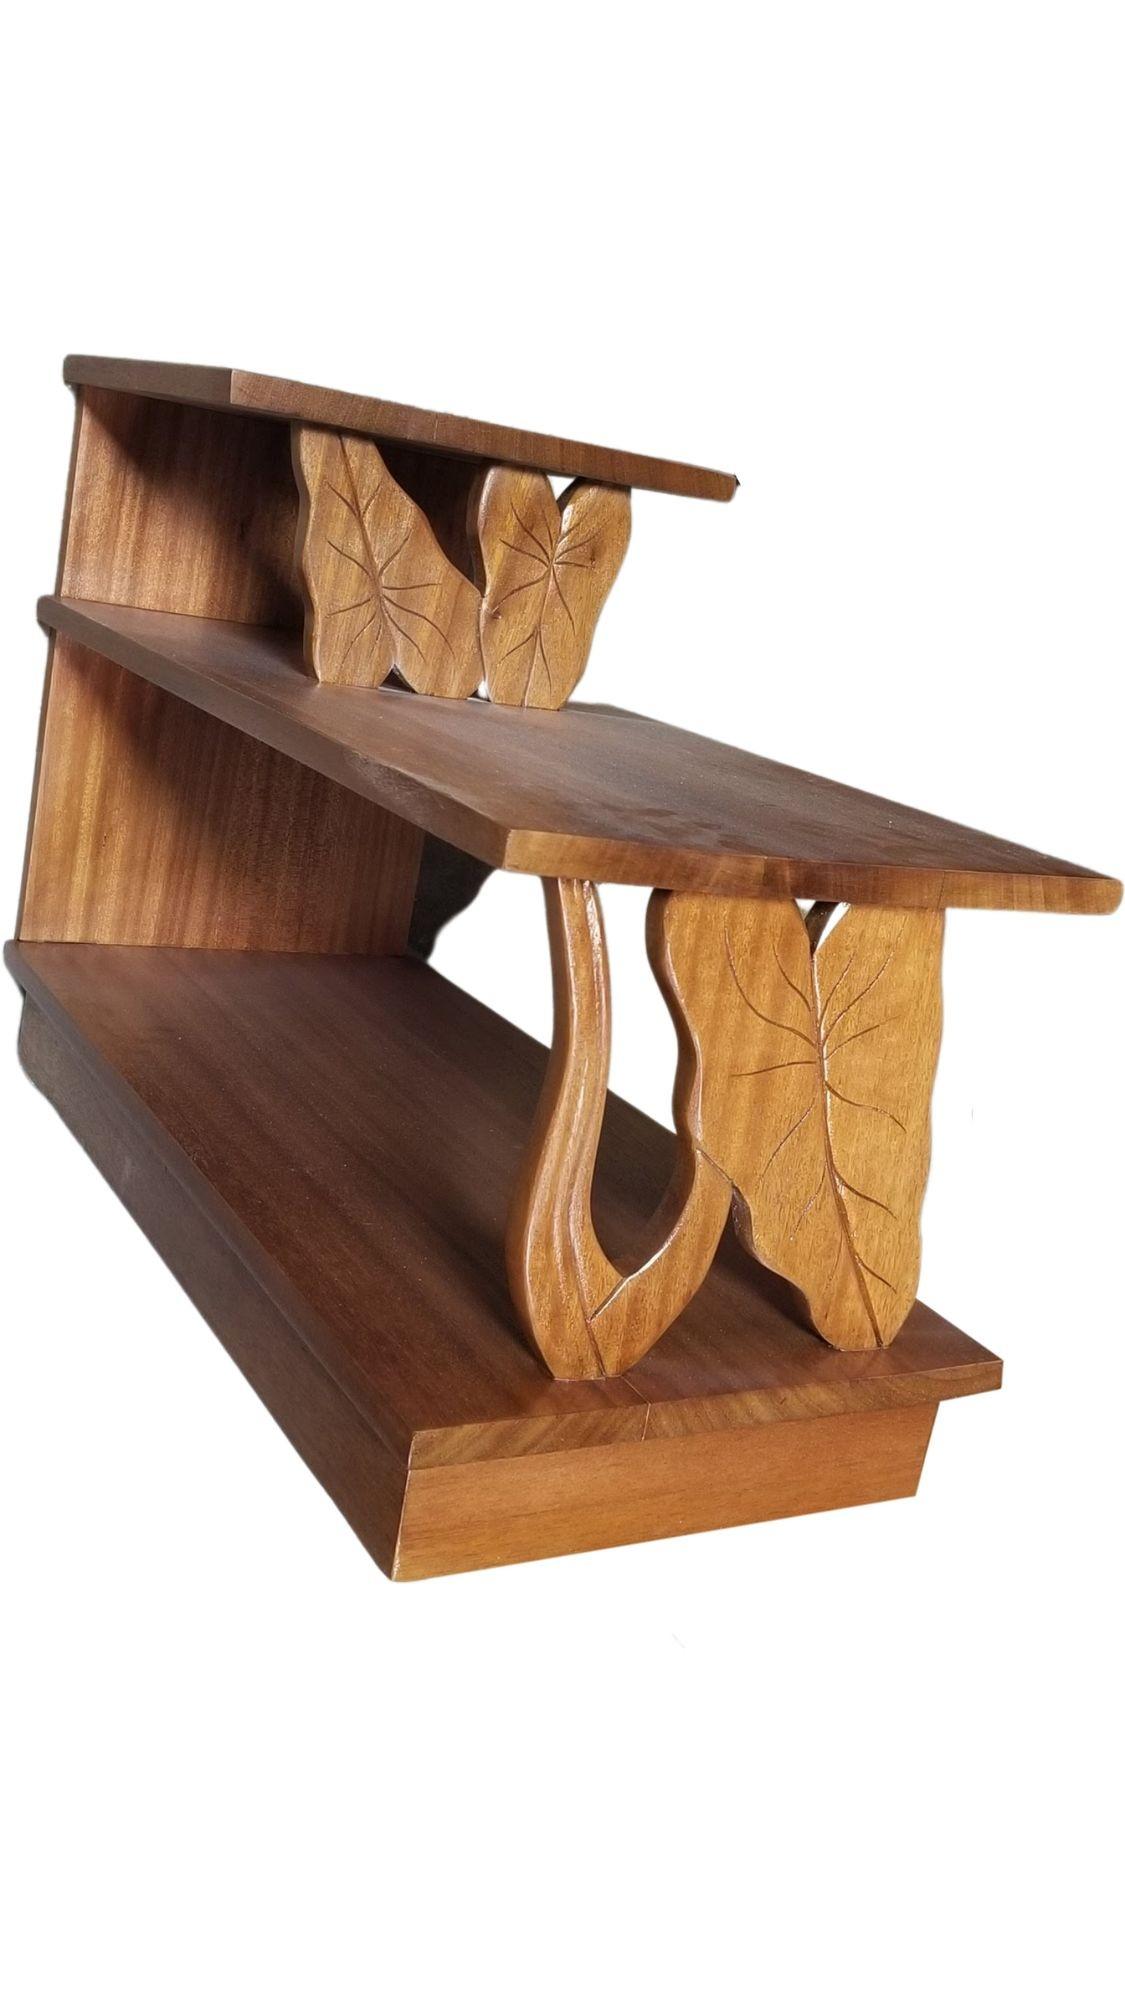 Mid-Century Hawaiian Koa Wood table set of 3 featuring hand-carved botanical Calla Lily flower and leaves table legs and sides. Two side tables are perfect for either side of a sitting area or bed, and one center coffee table to match.

Hawaiian Koa